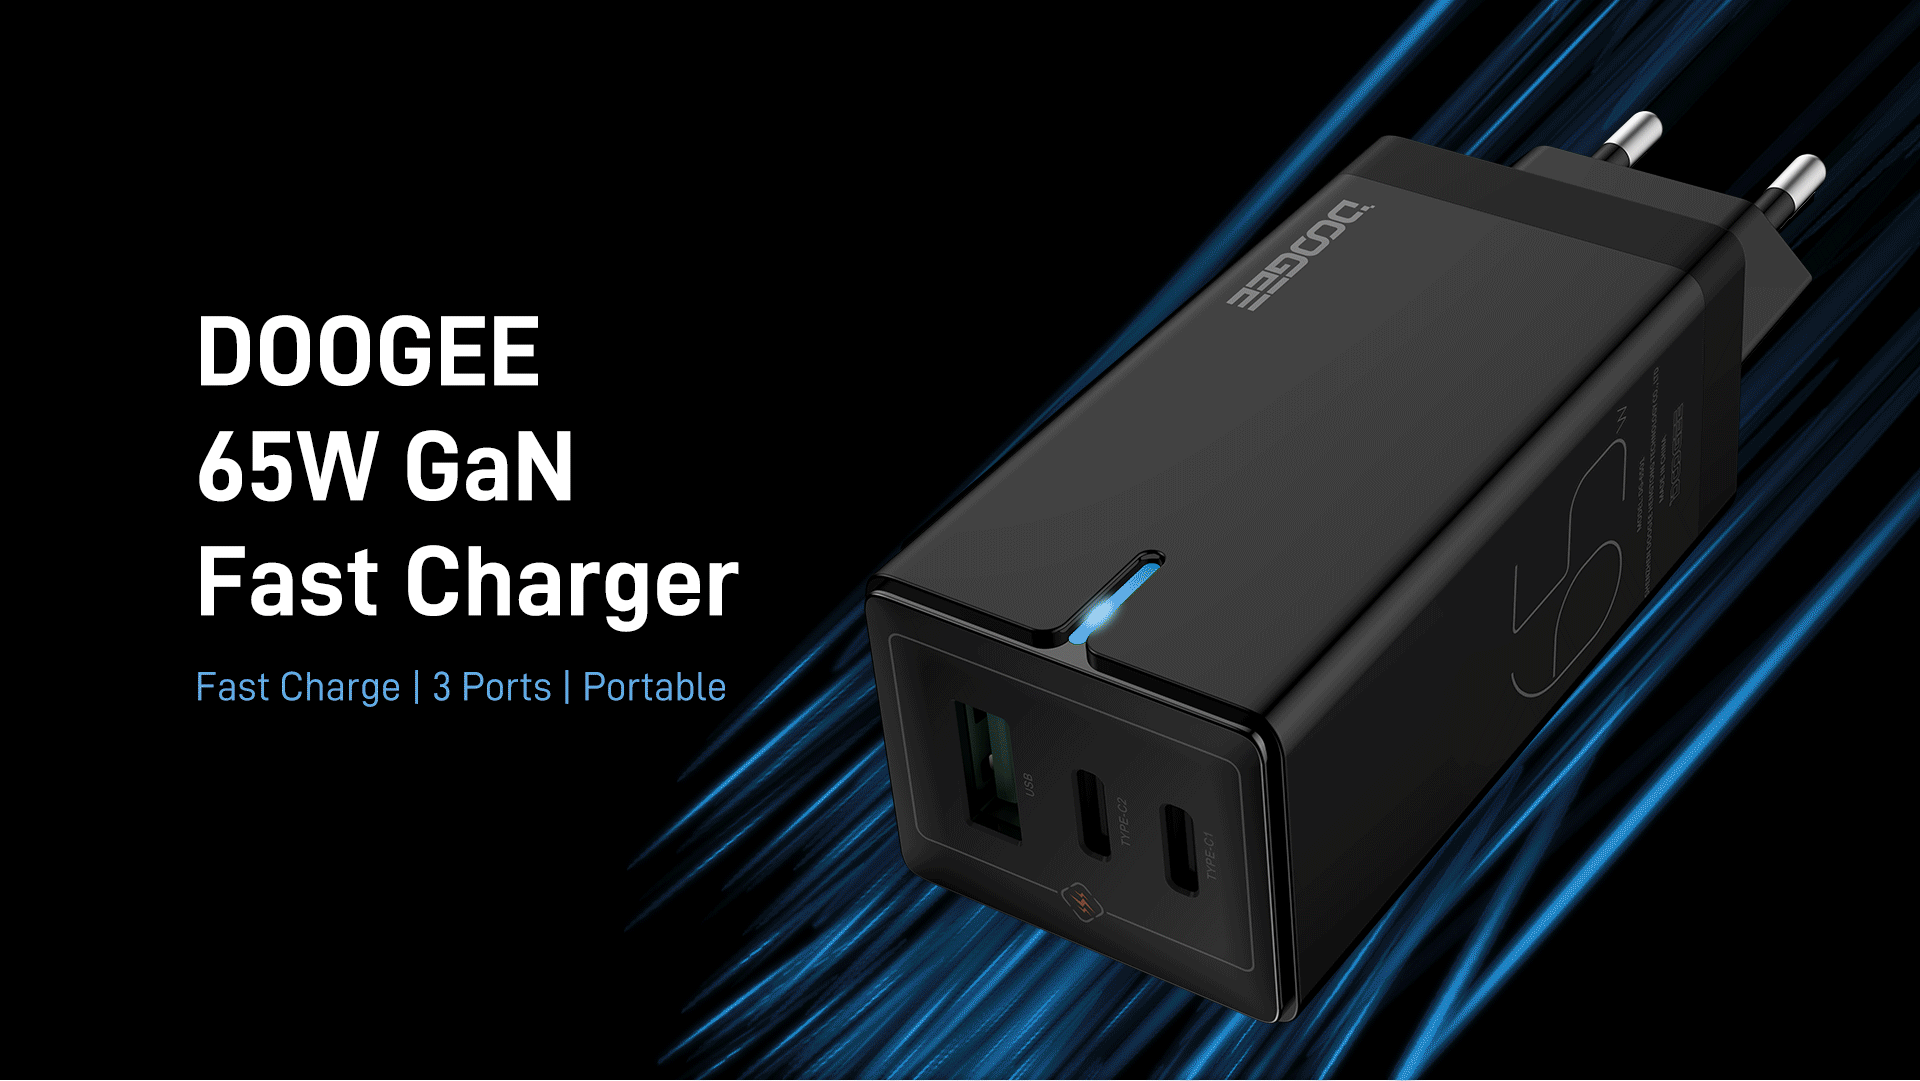 Doogee 65W GaN Fast Charger